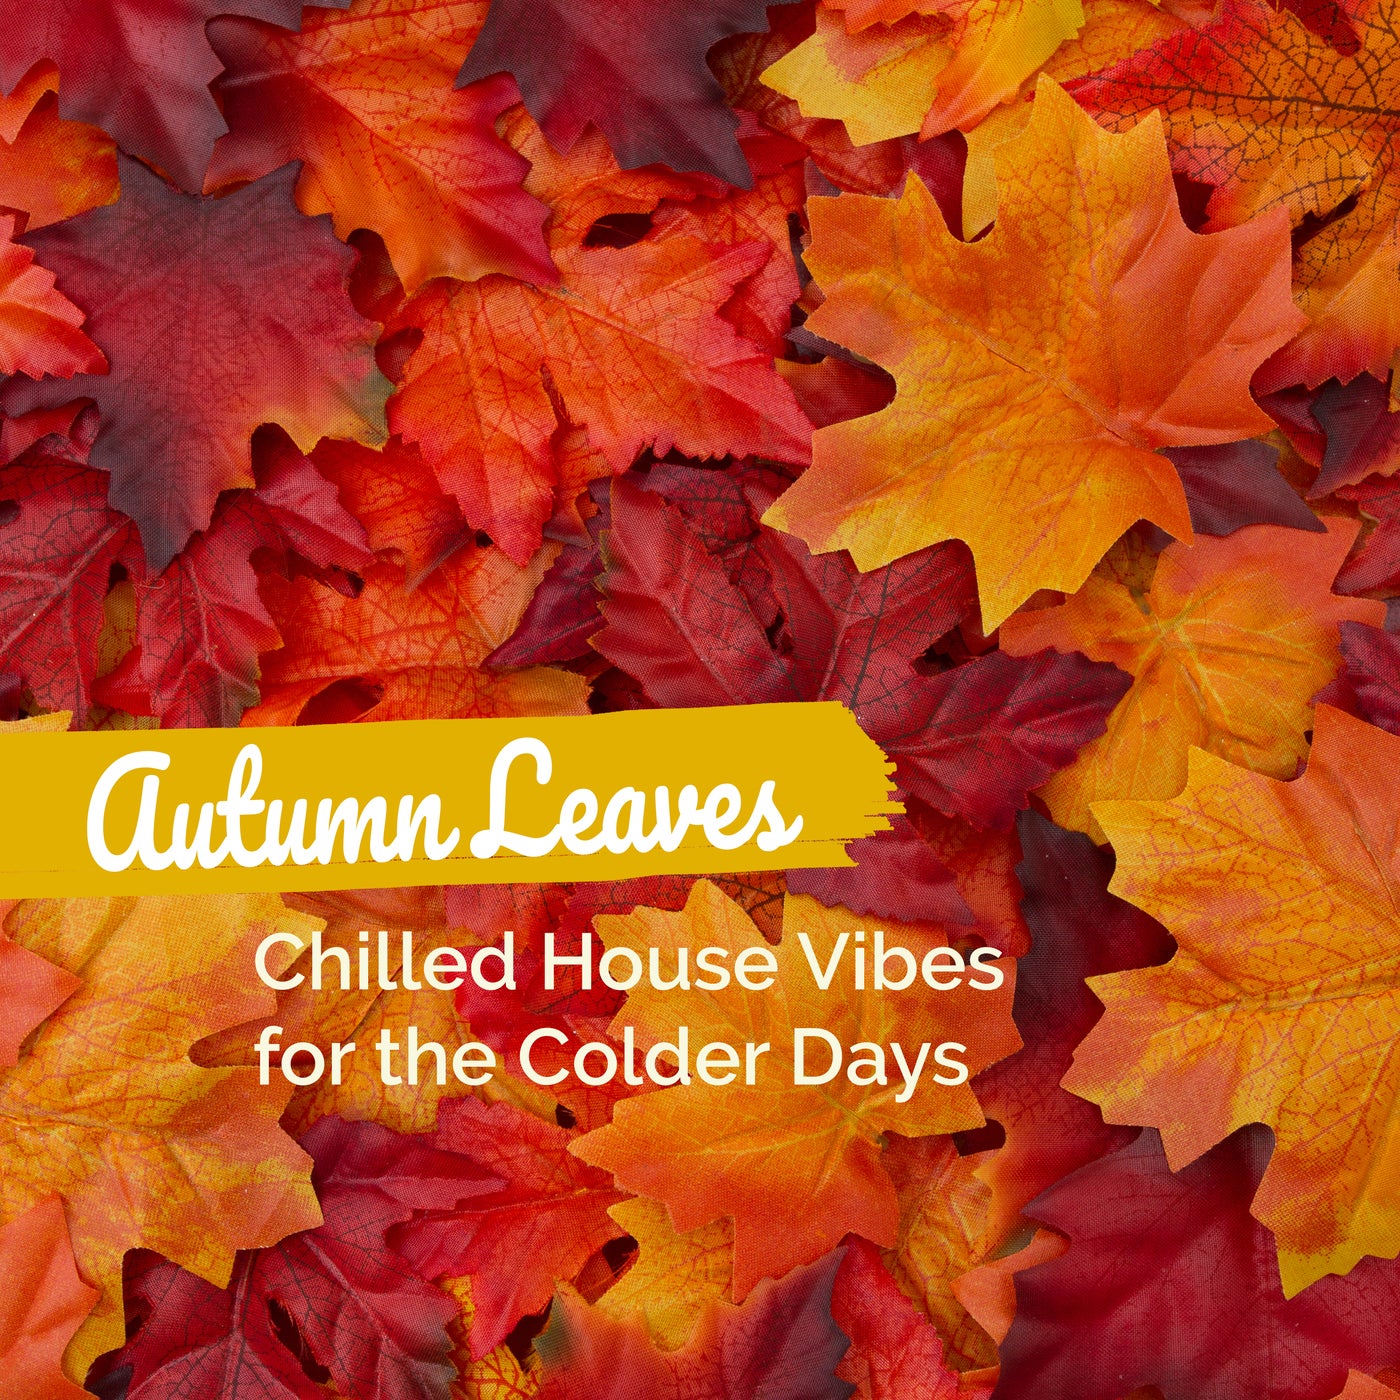 Autumn Leaves: Chilled House Vibes for the Colder Days